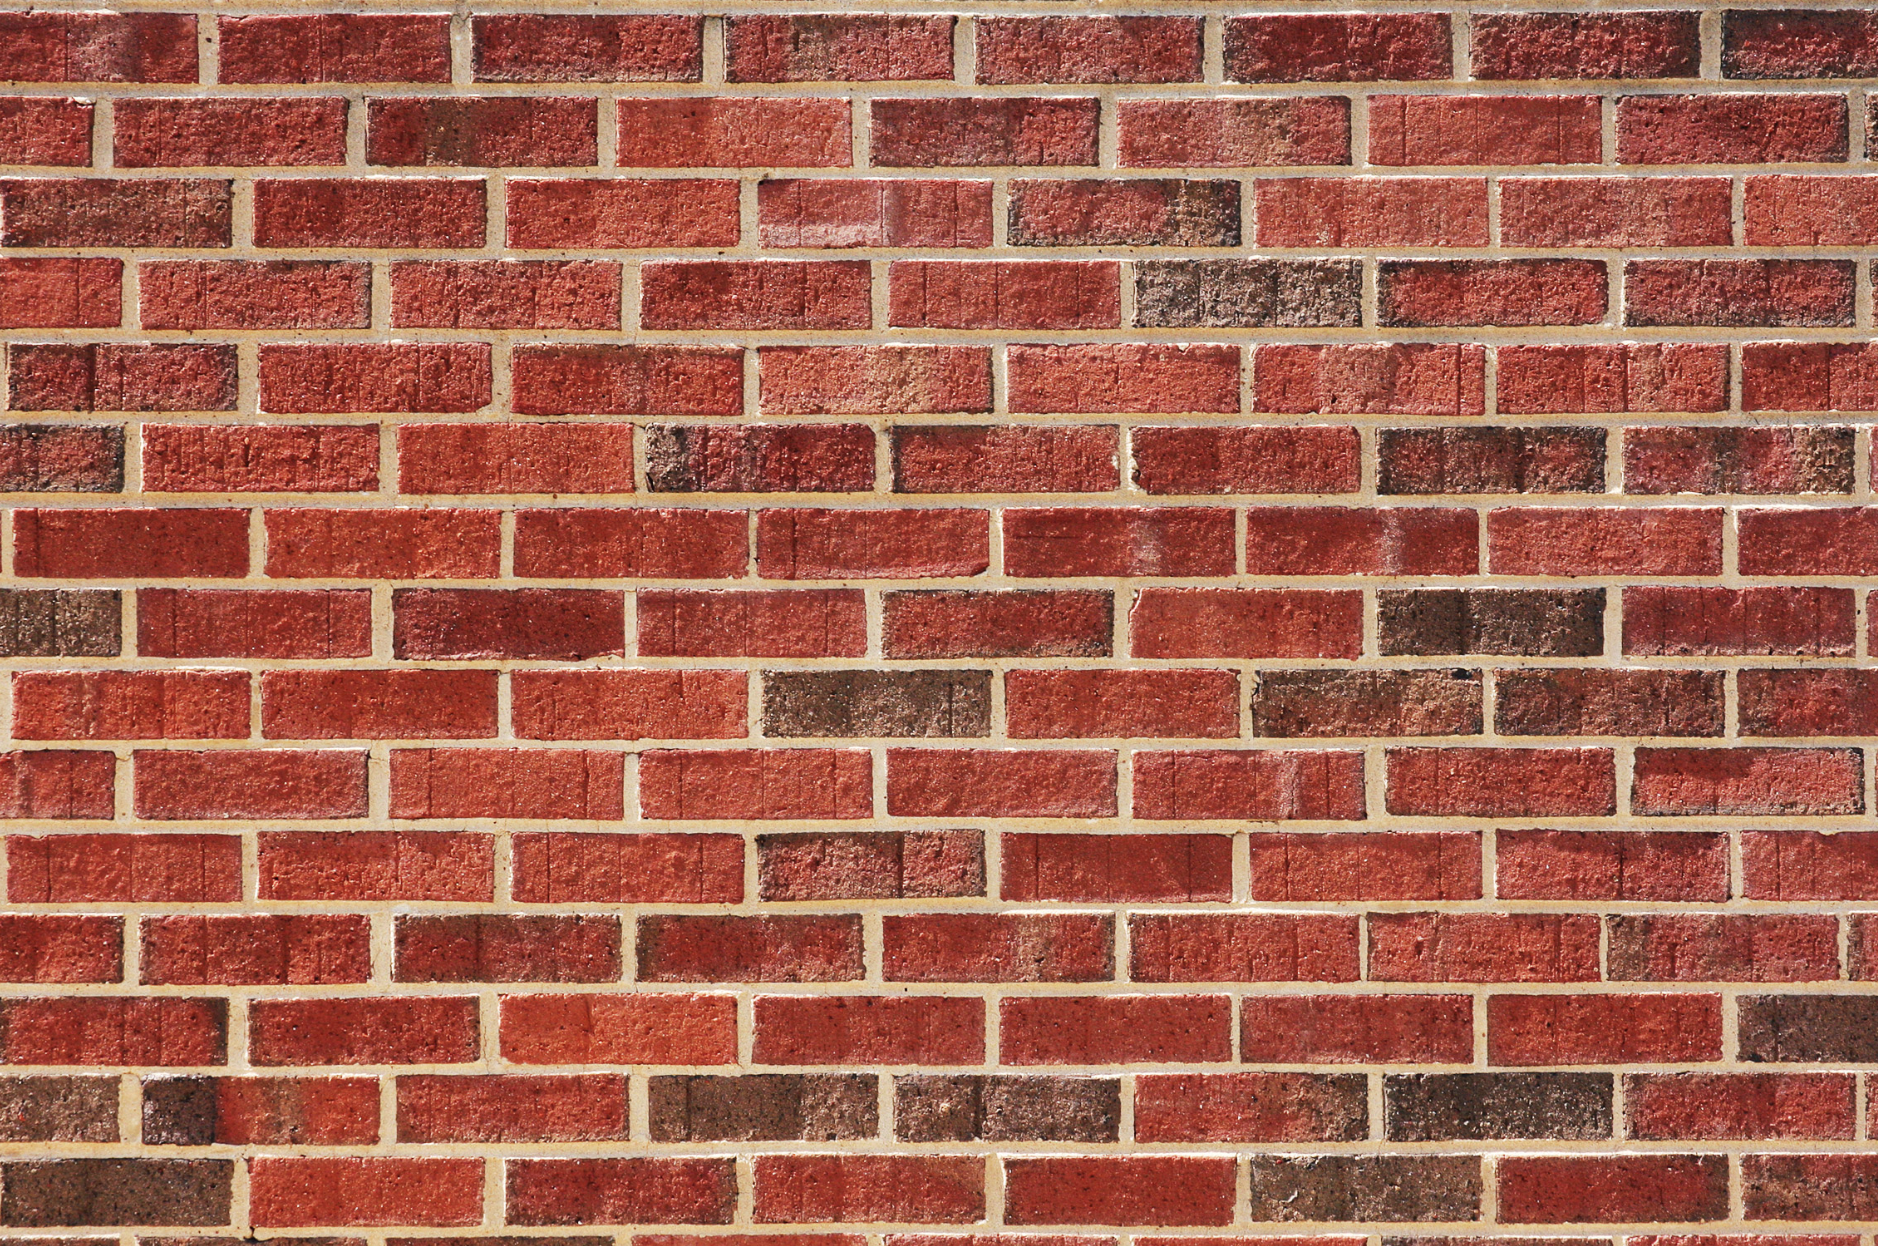 A brick wall, meant to represent management